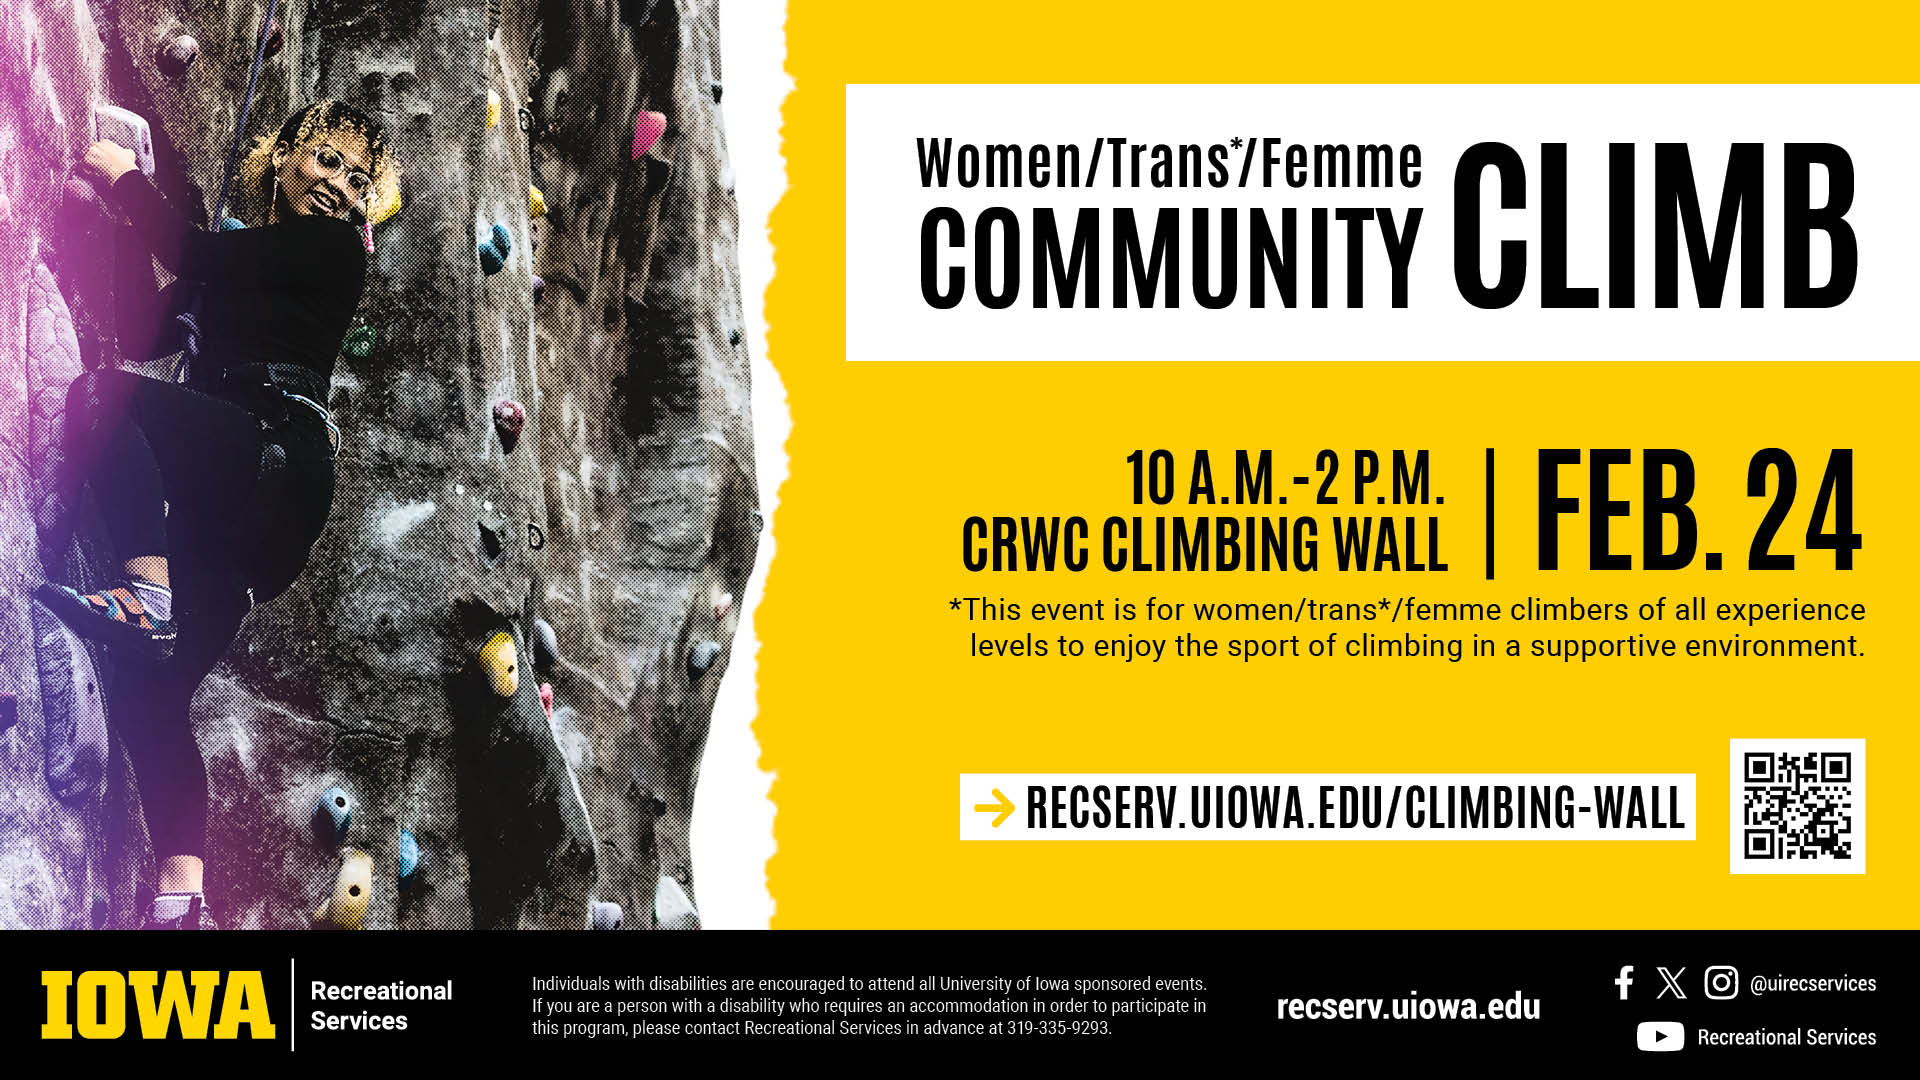 Join us for a community climb on Feb. 24